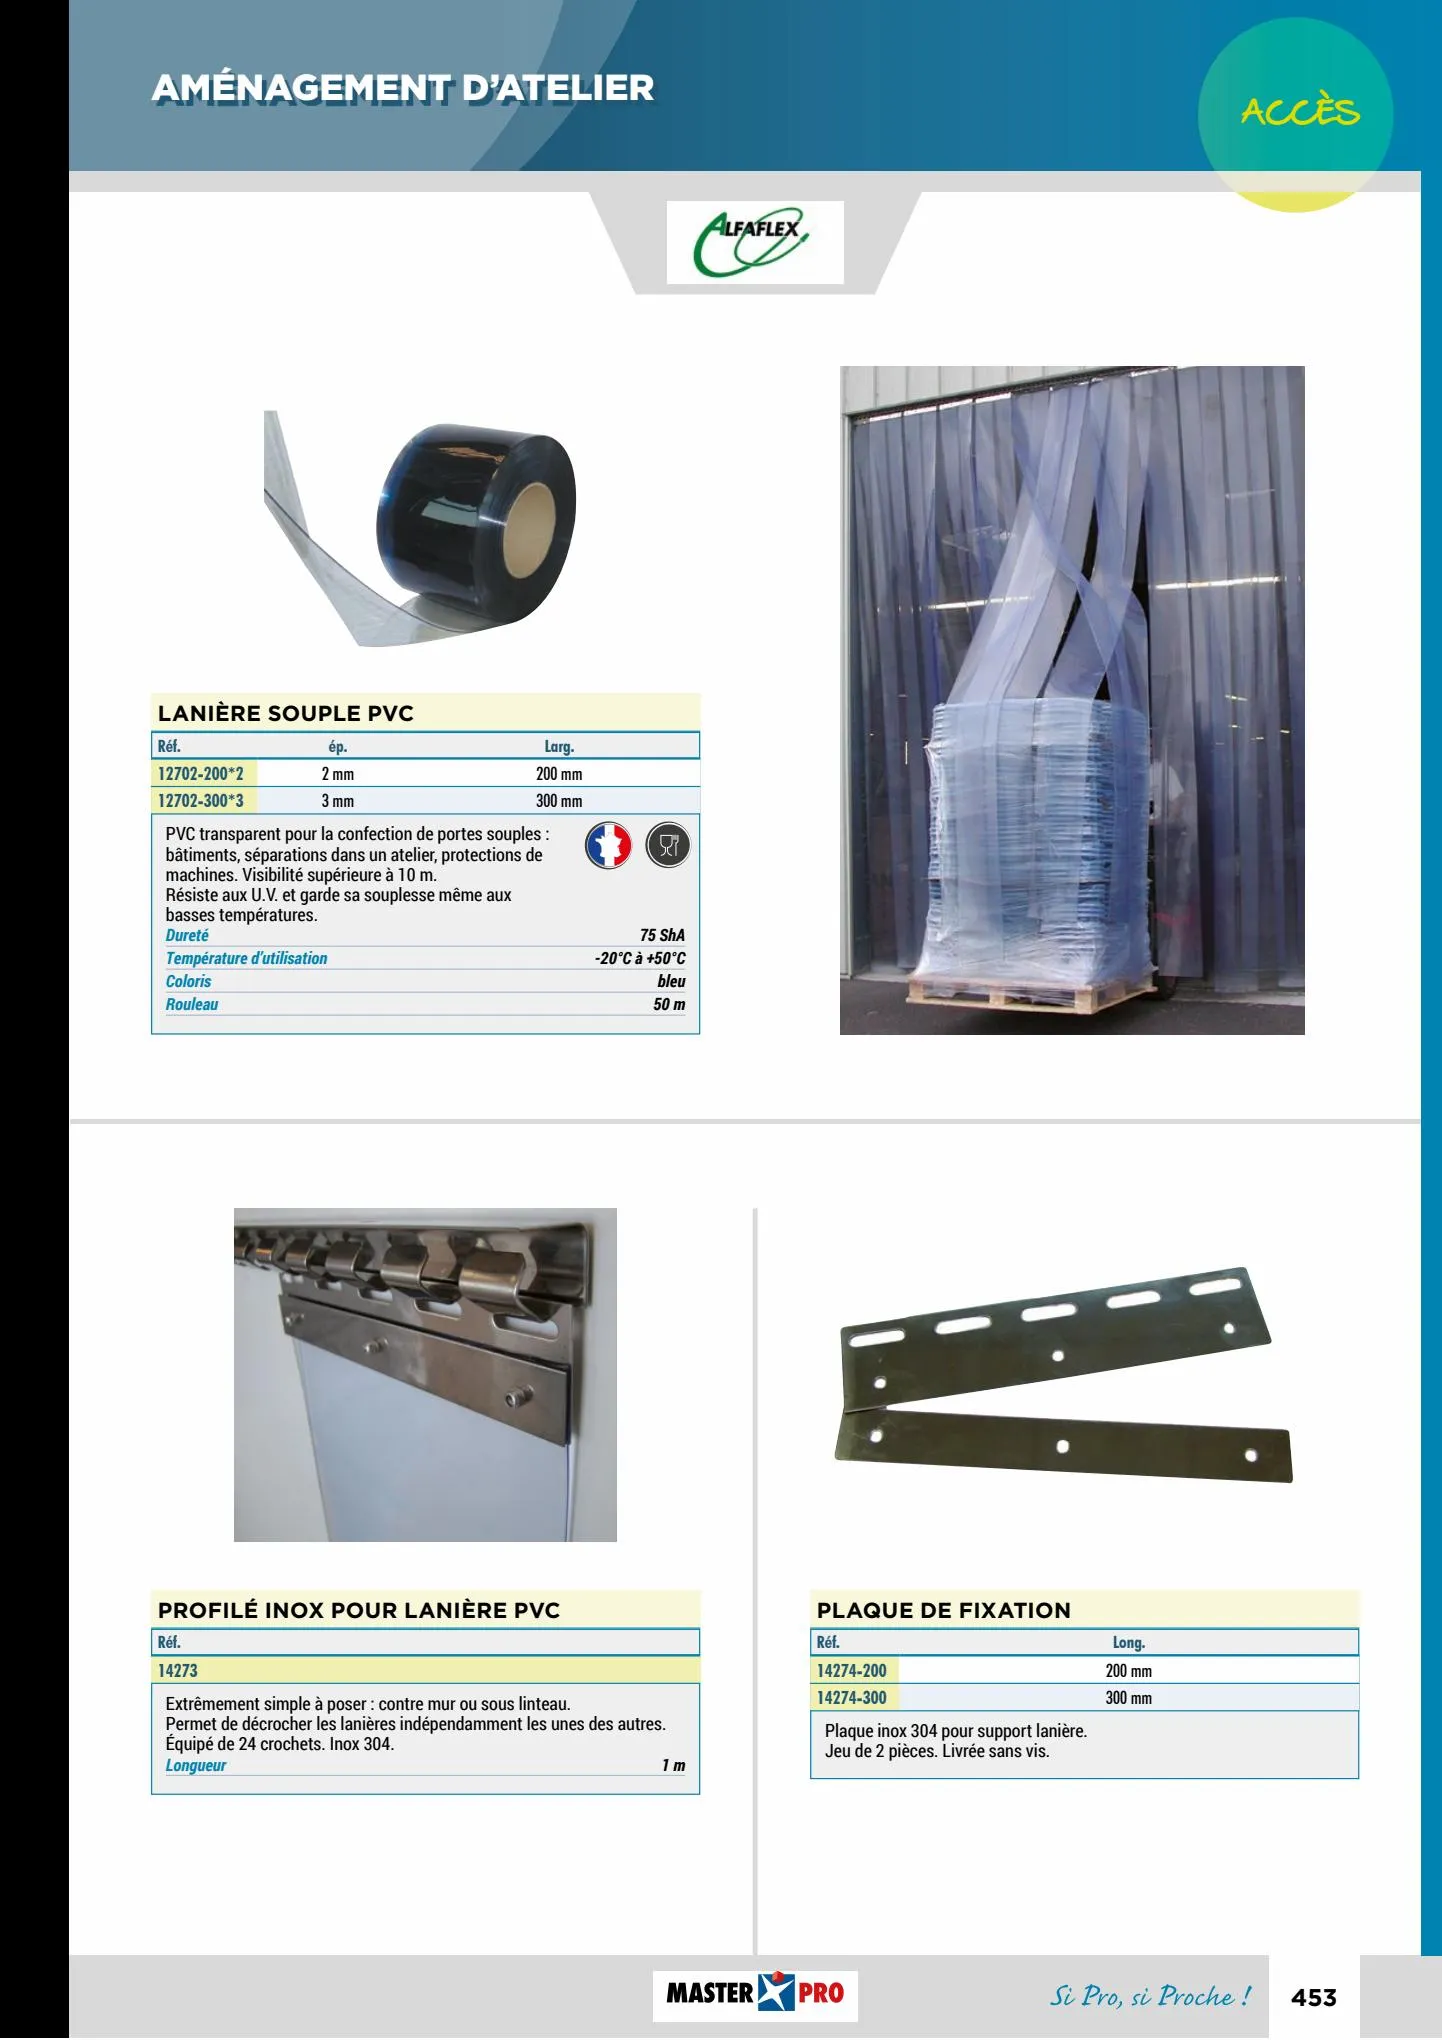 Catalogue Equipment de protection individual, page 00062